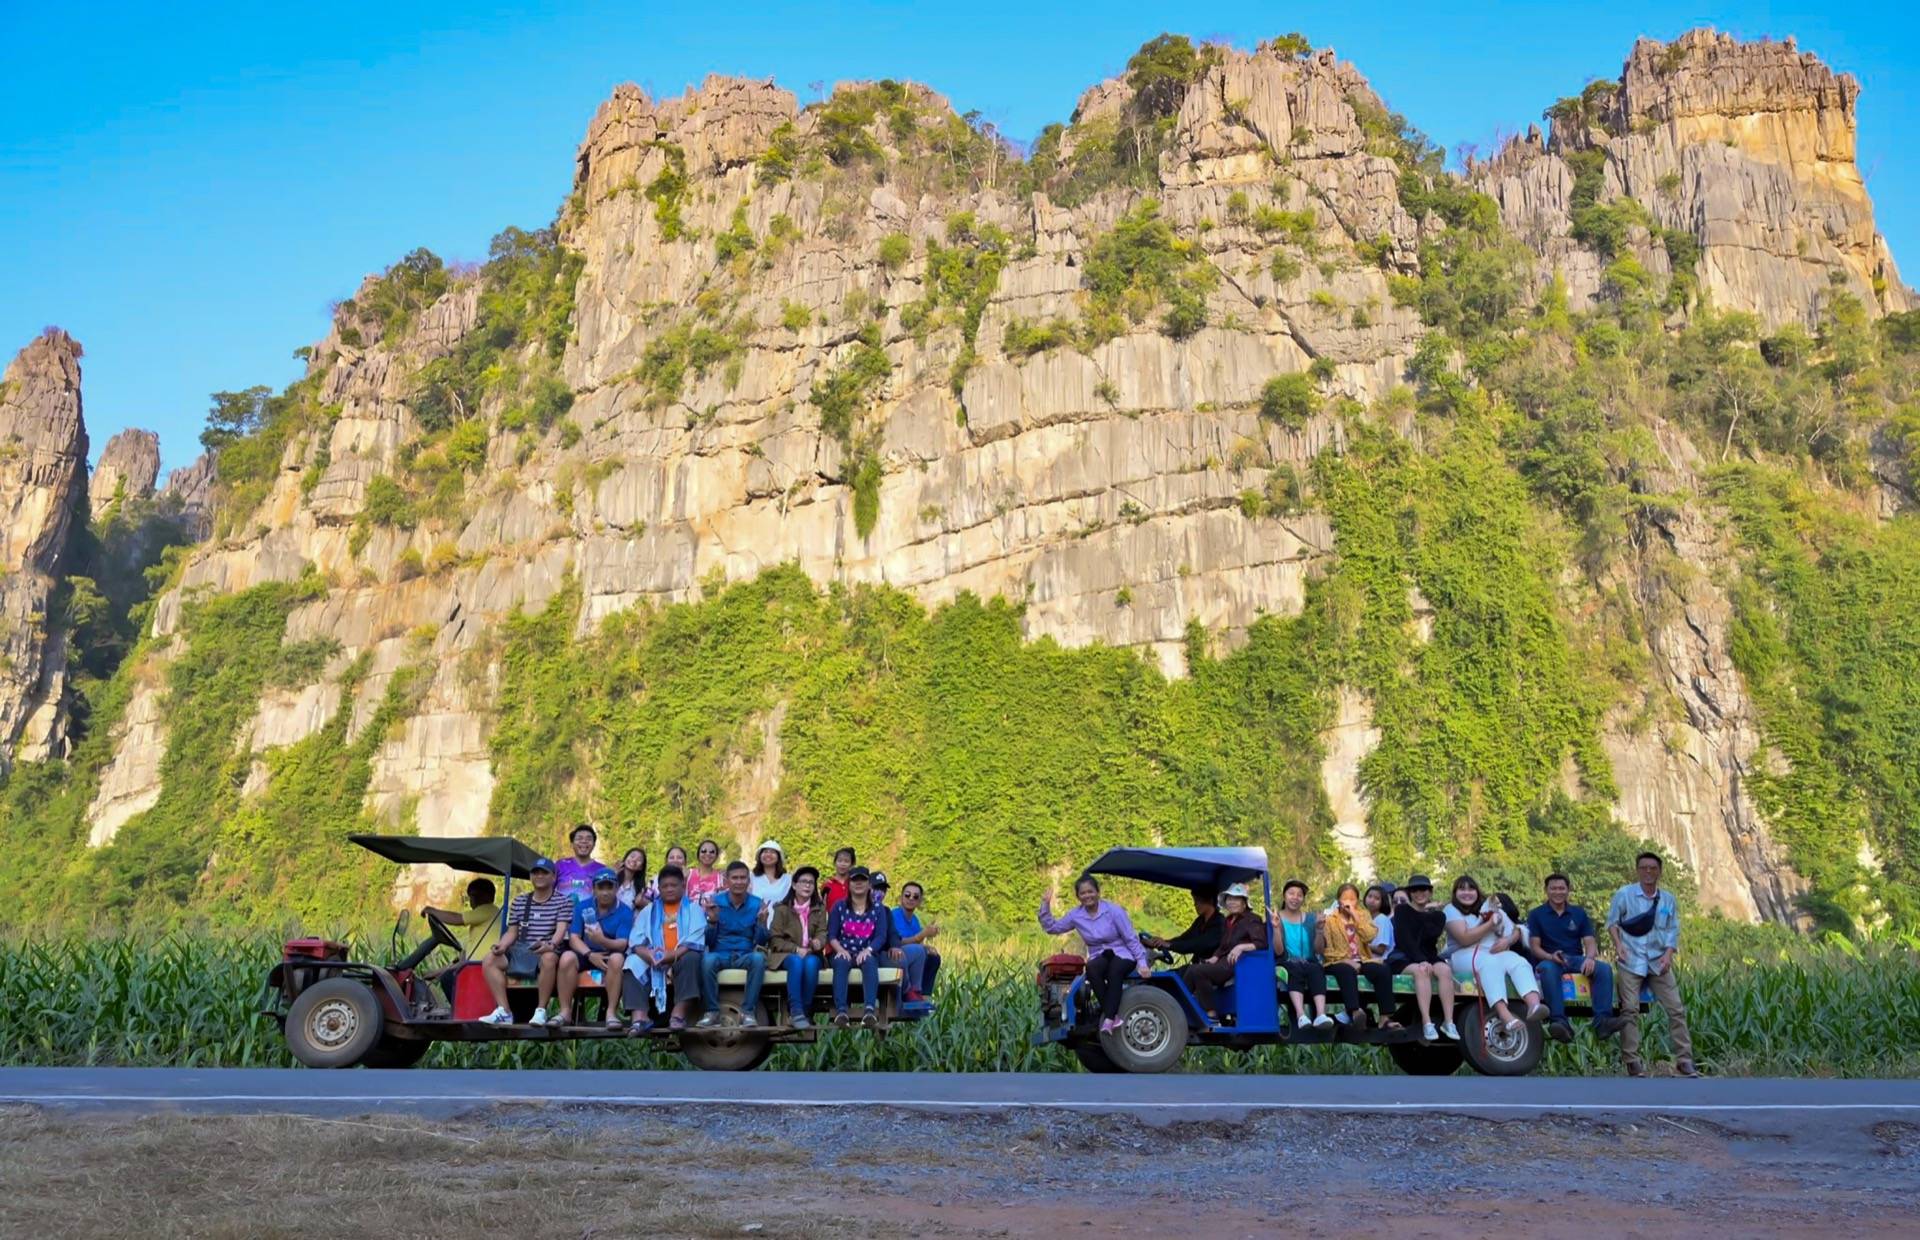 Ban Mung in Thailand- Limestone Mountains More than 300 years!